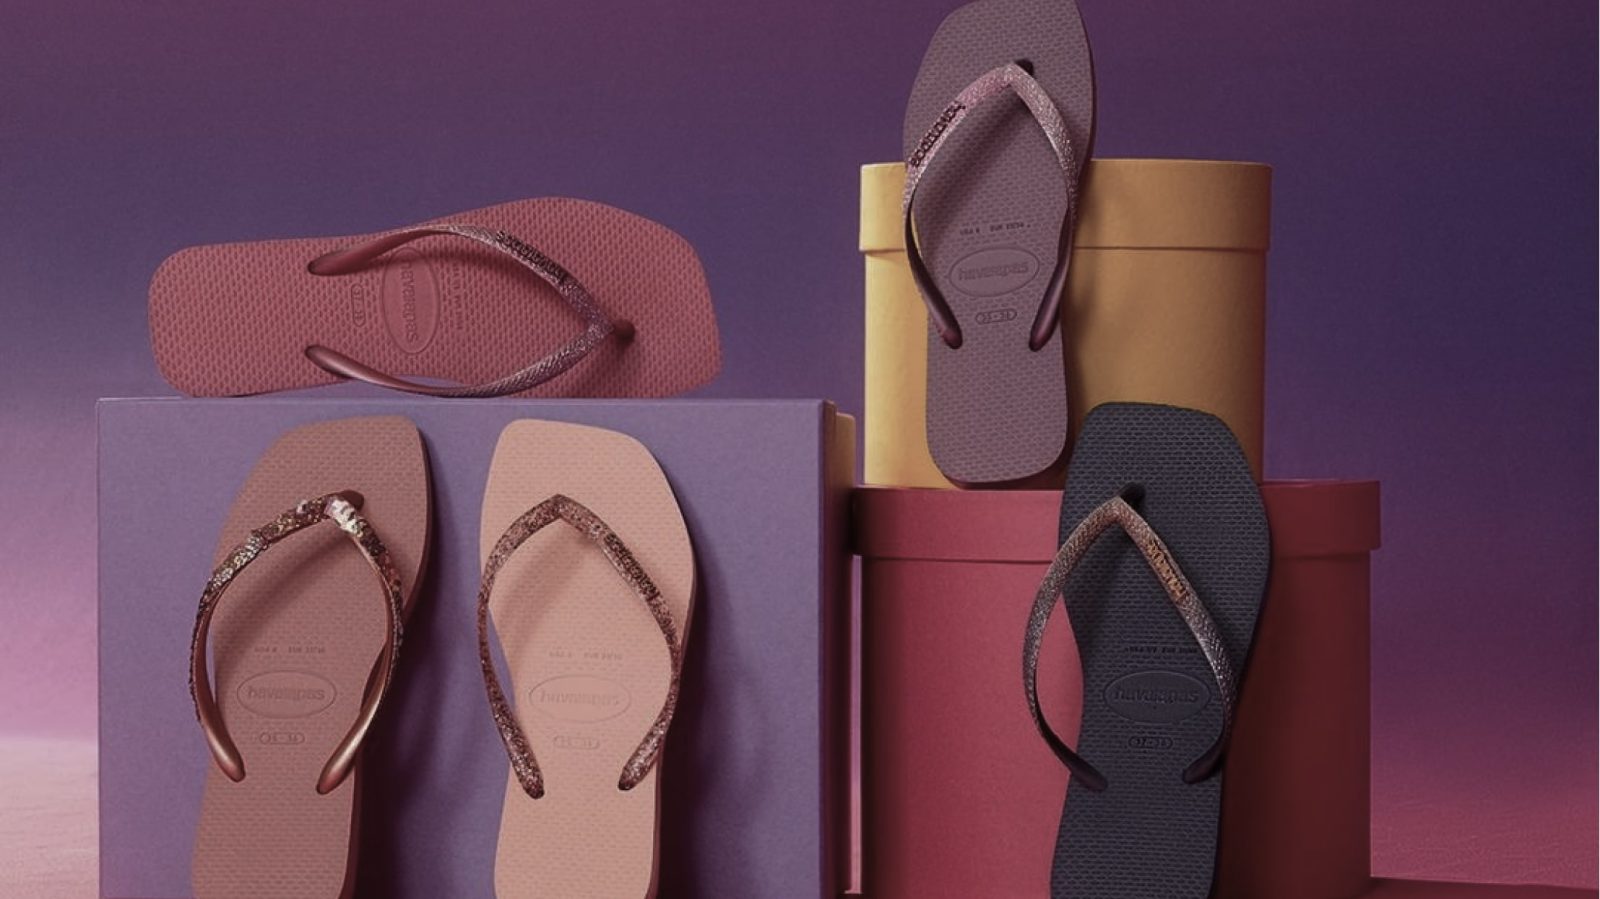 Five Havaianas flip-flops in different colors, stacked on boxes, a purple box, a pink box and a yellow box, in front of a plain purple background